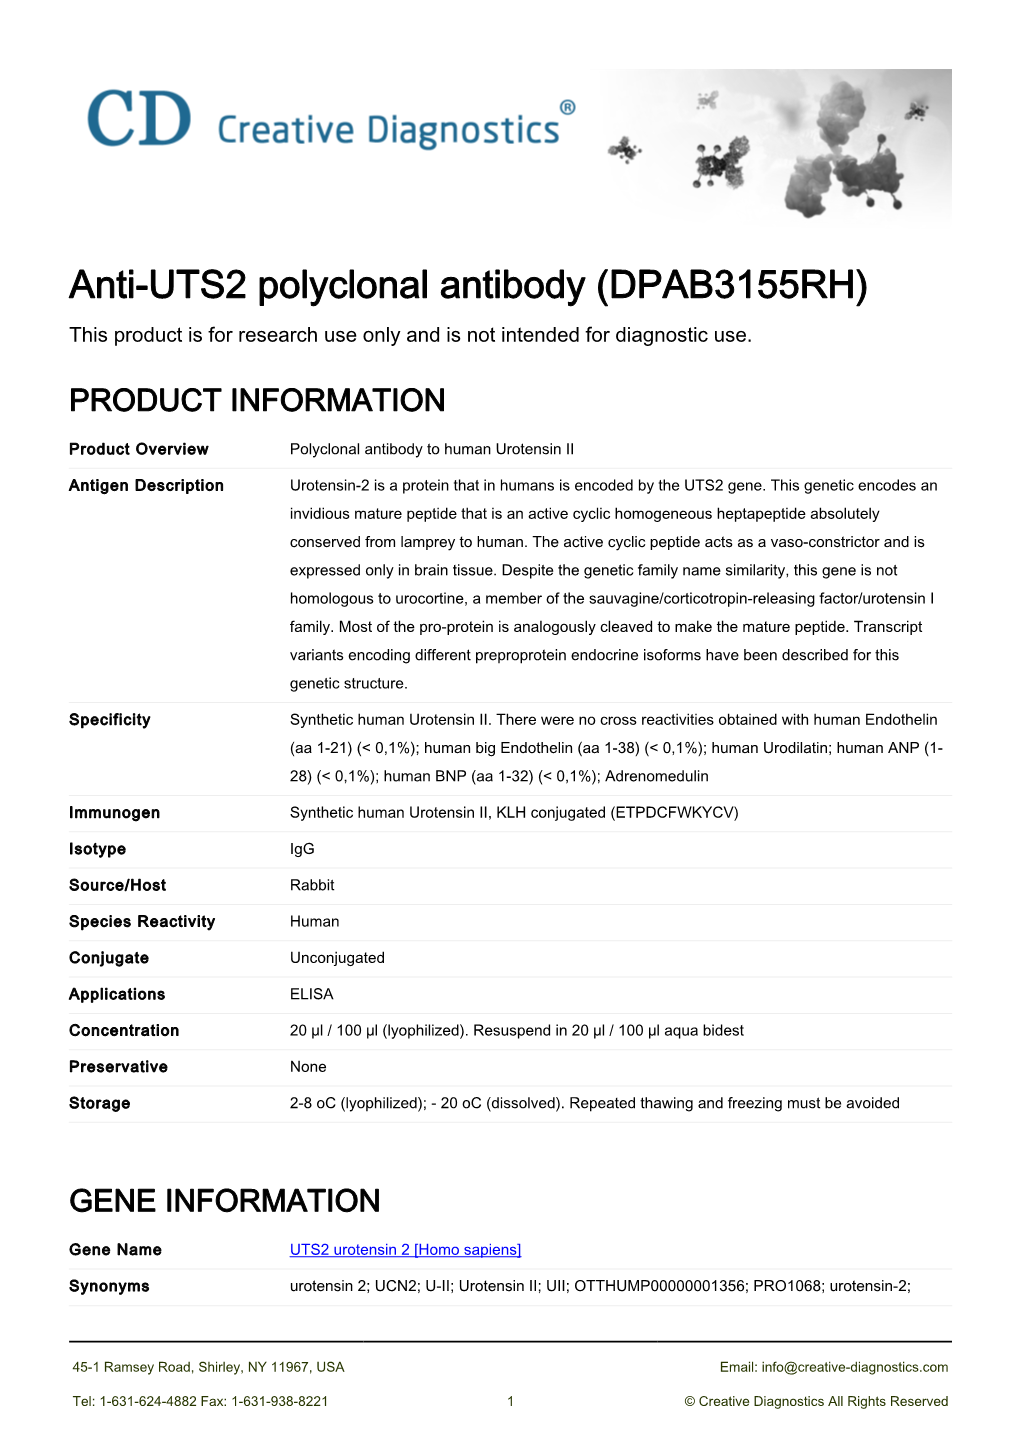 Anti-UTS2 Polyclonal Antibody (DPAB3155RH) This Product Is for Research Use Only and Is Not Intended for Diagnostic Use